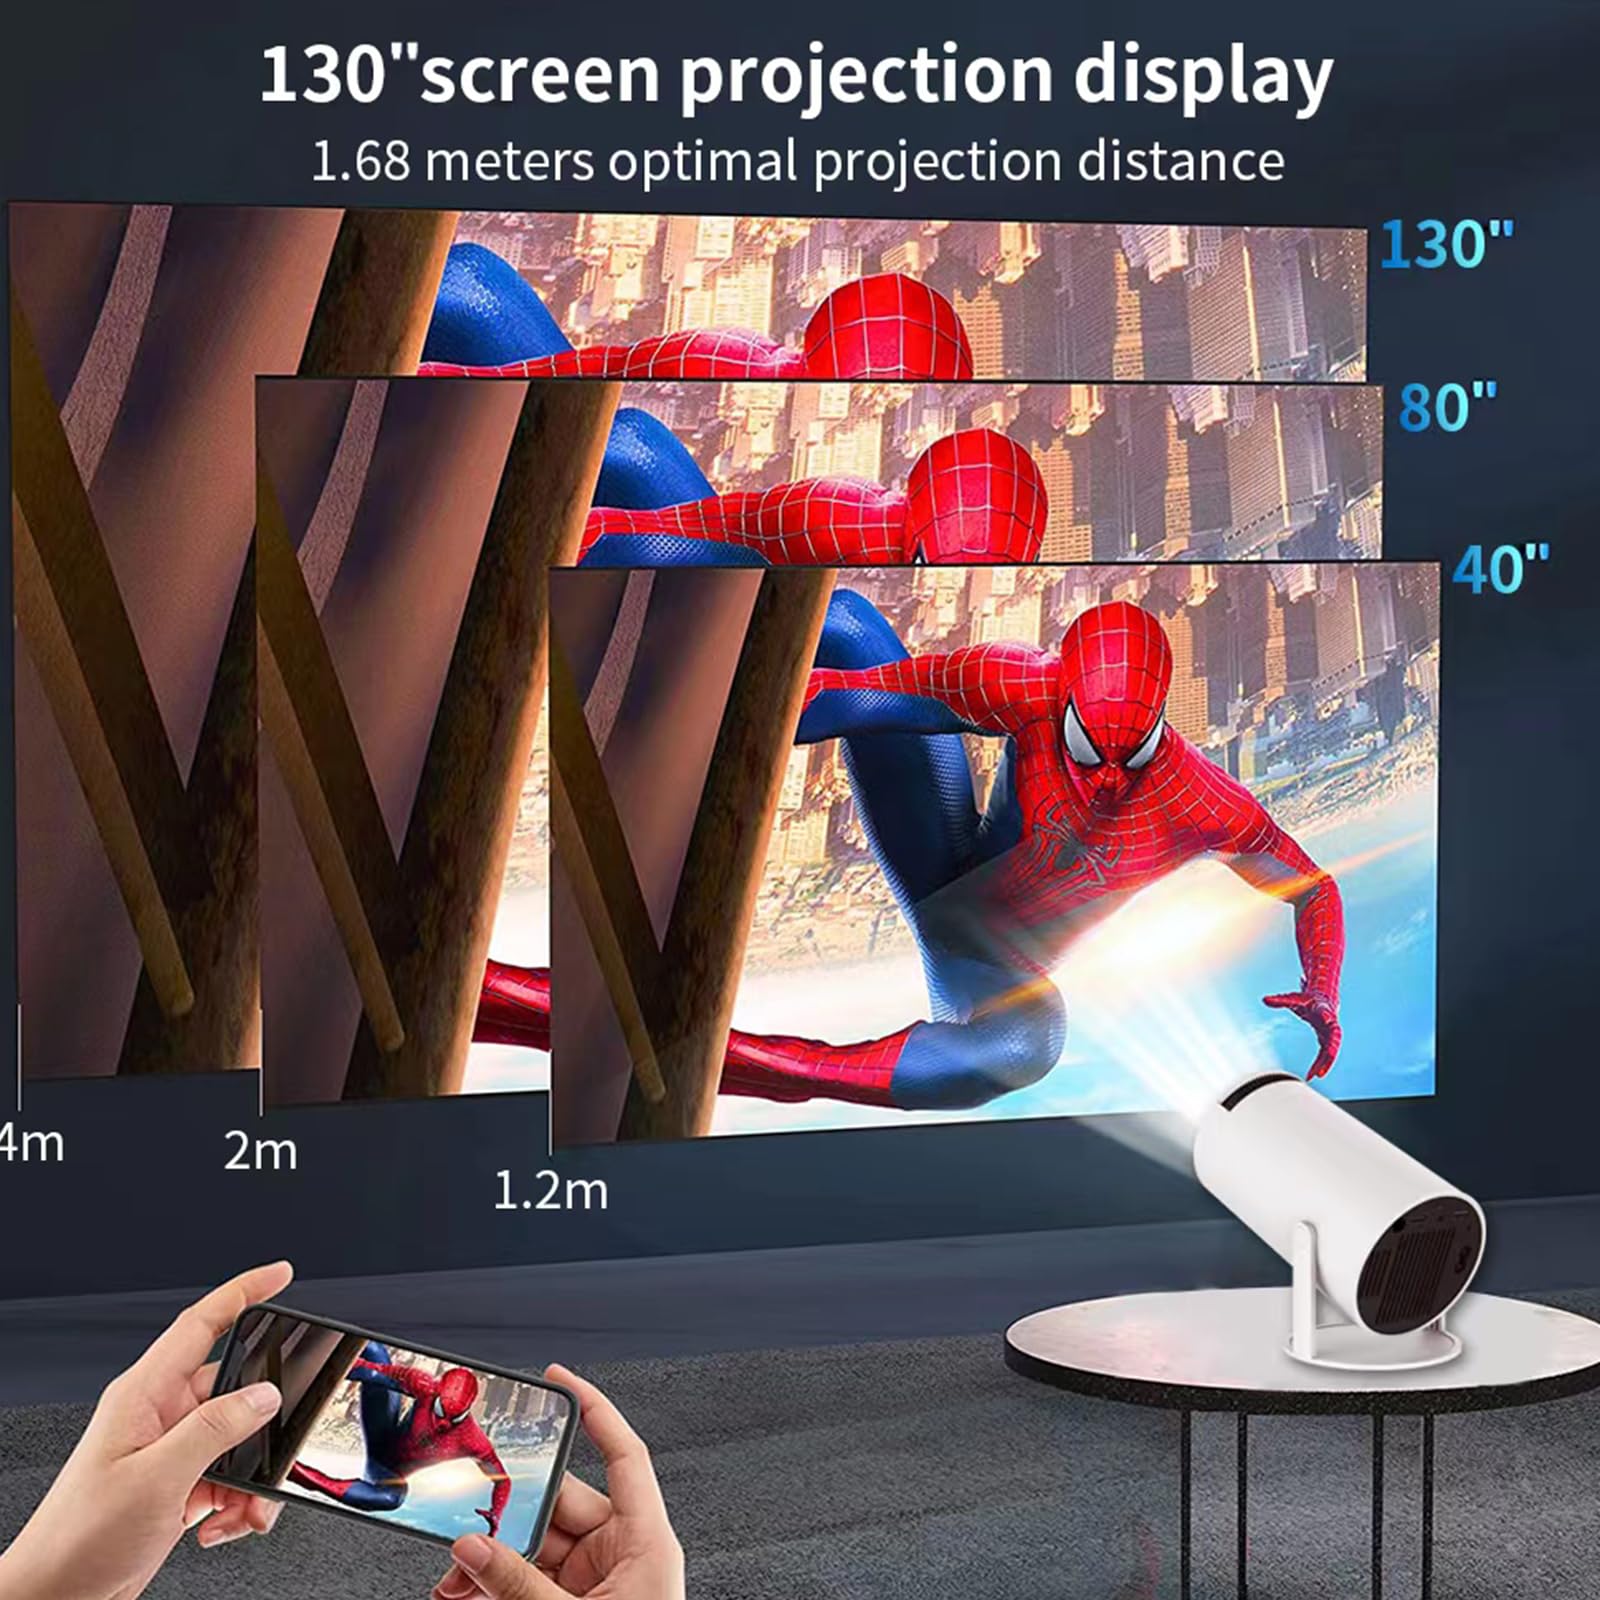 Smart Mini Projector 4K 5G WIFI, Big Screen Experience with Premium 360 Sound, 5.0 Bluetooth Movie Projector